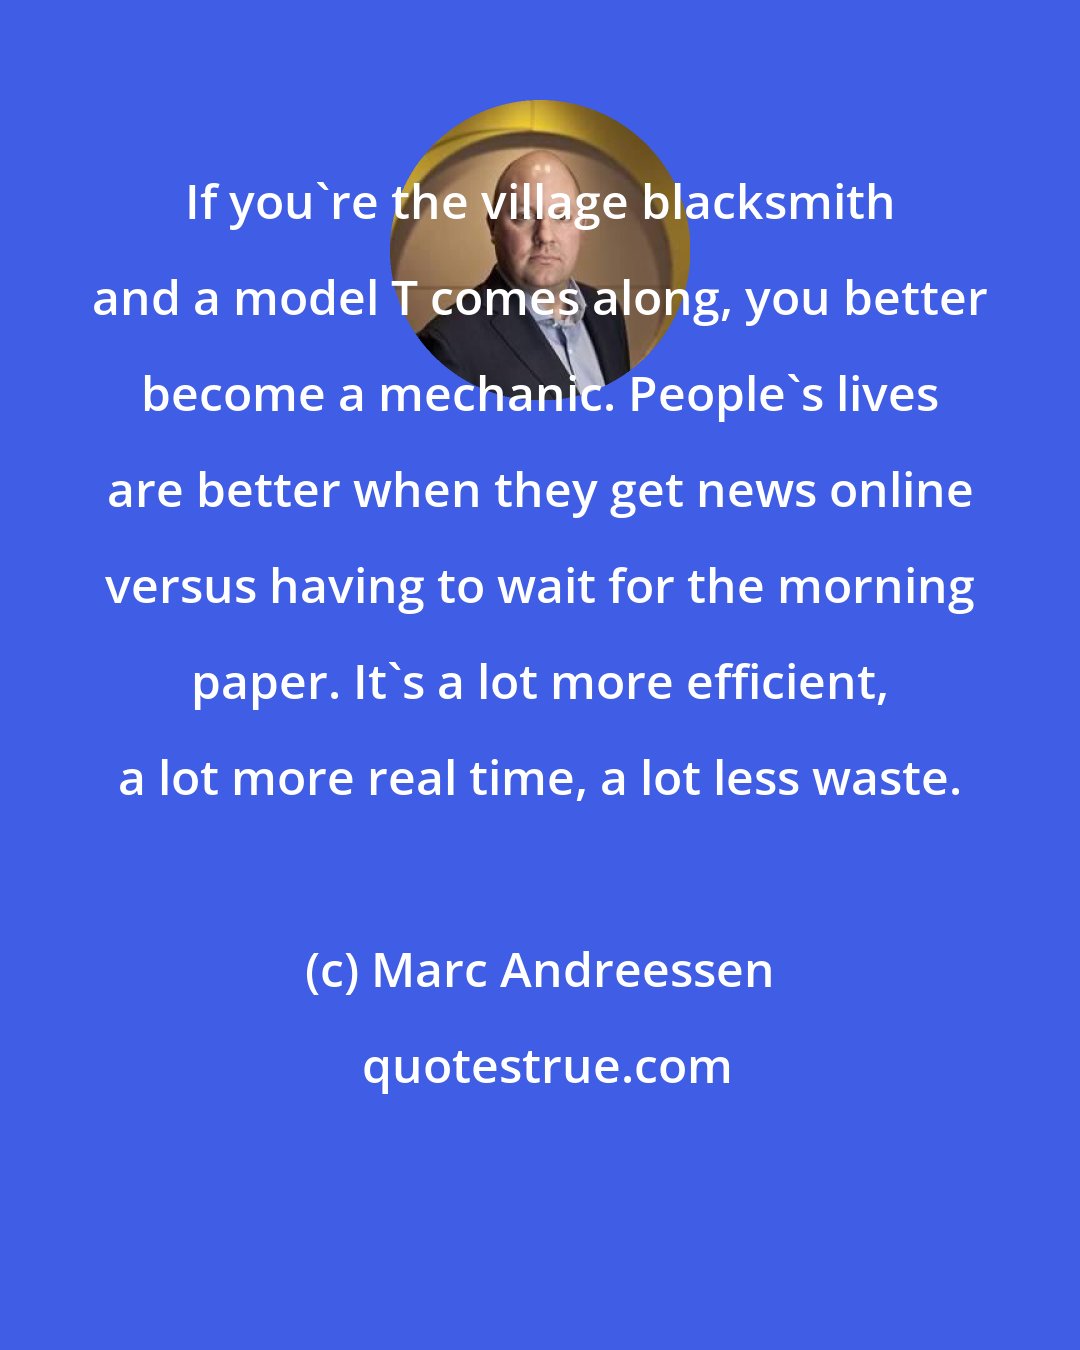 Marc Andreessen: If you're the village blacksmith and a model T comes along, you better become a mechanic. People's lives are better when they get news online versus having to wait for the morning paper. It's a lot more efficient, a lot more real time, a lot less waste.